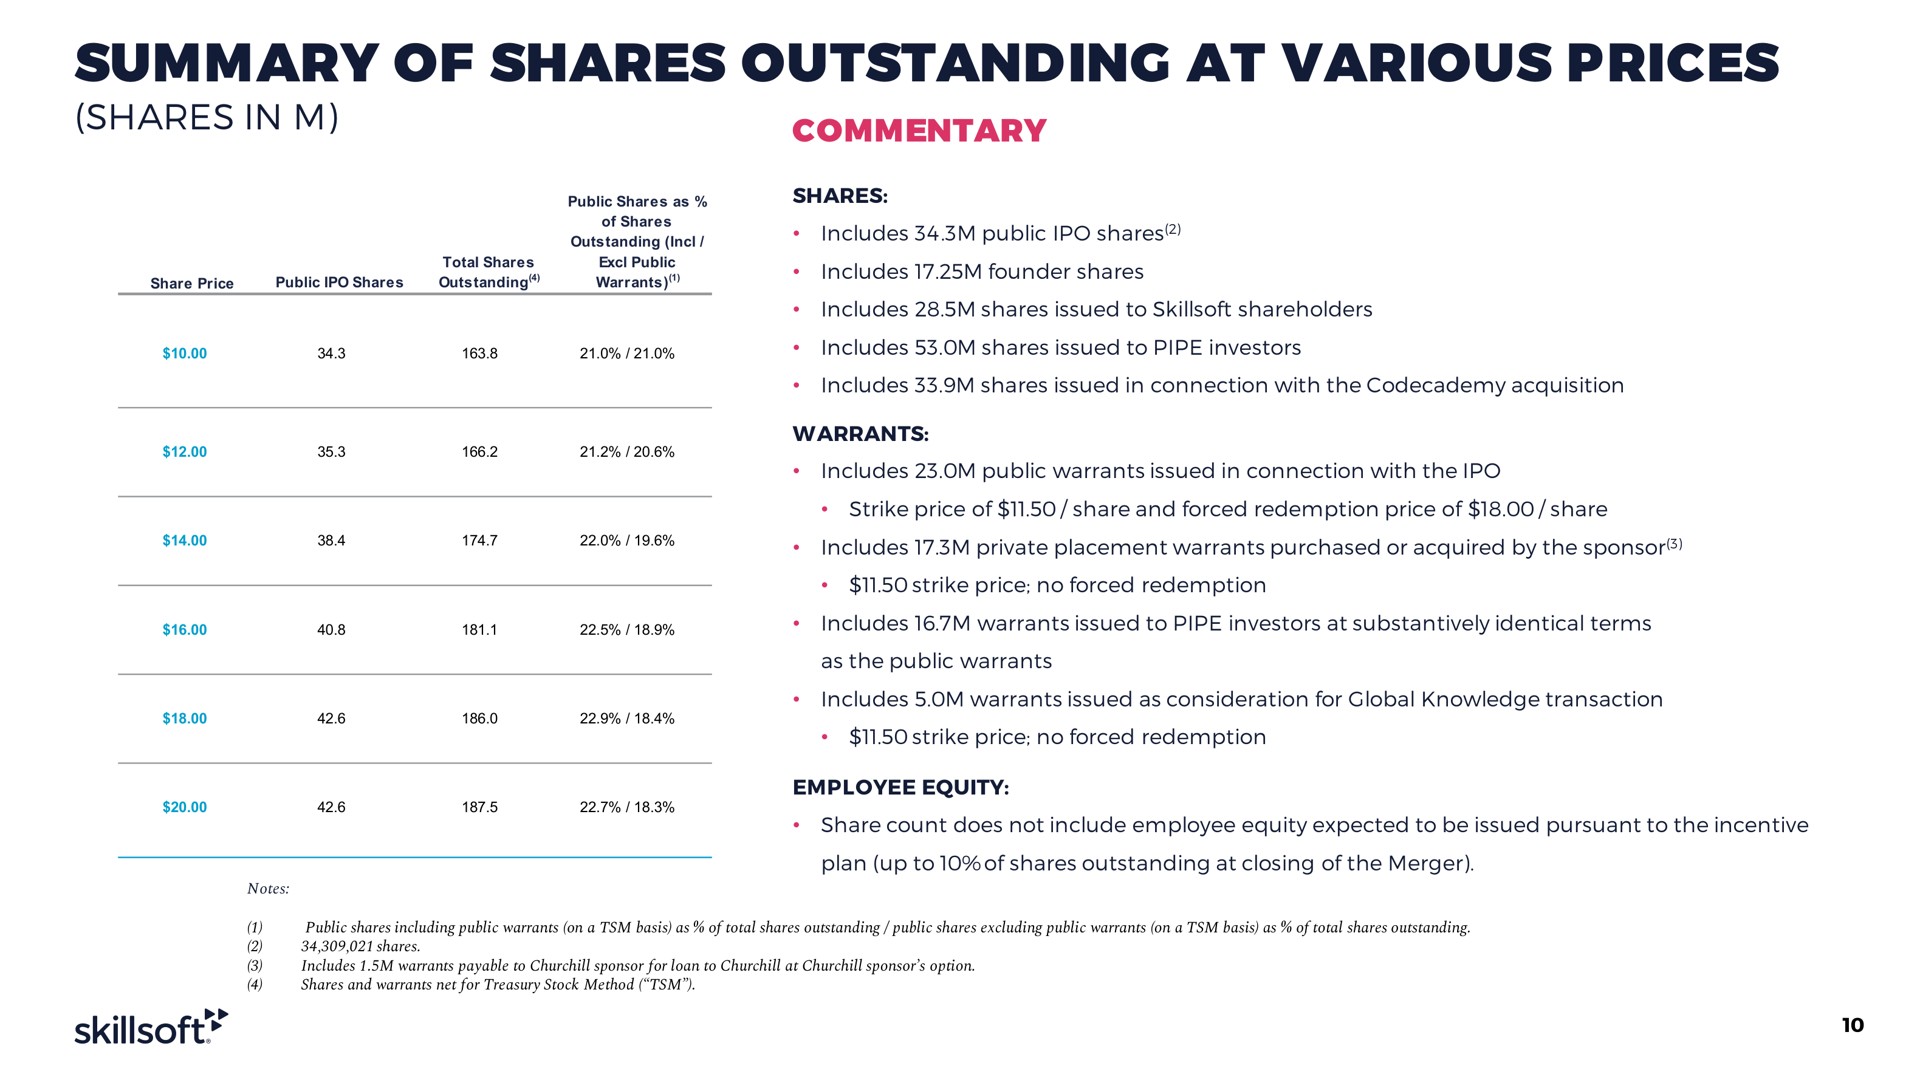 summary of shares outstanding at various prices shares in commentary | Skillsoft